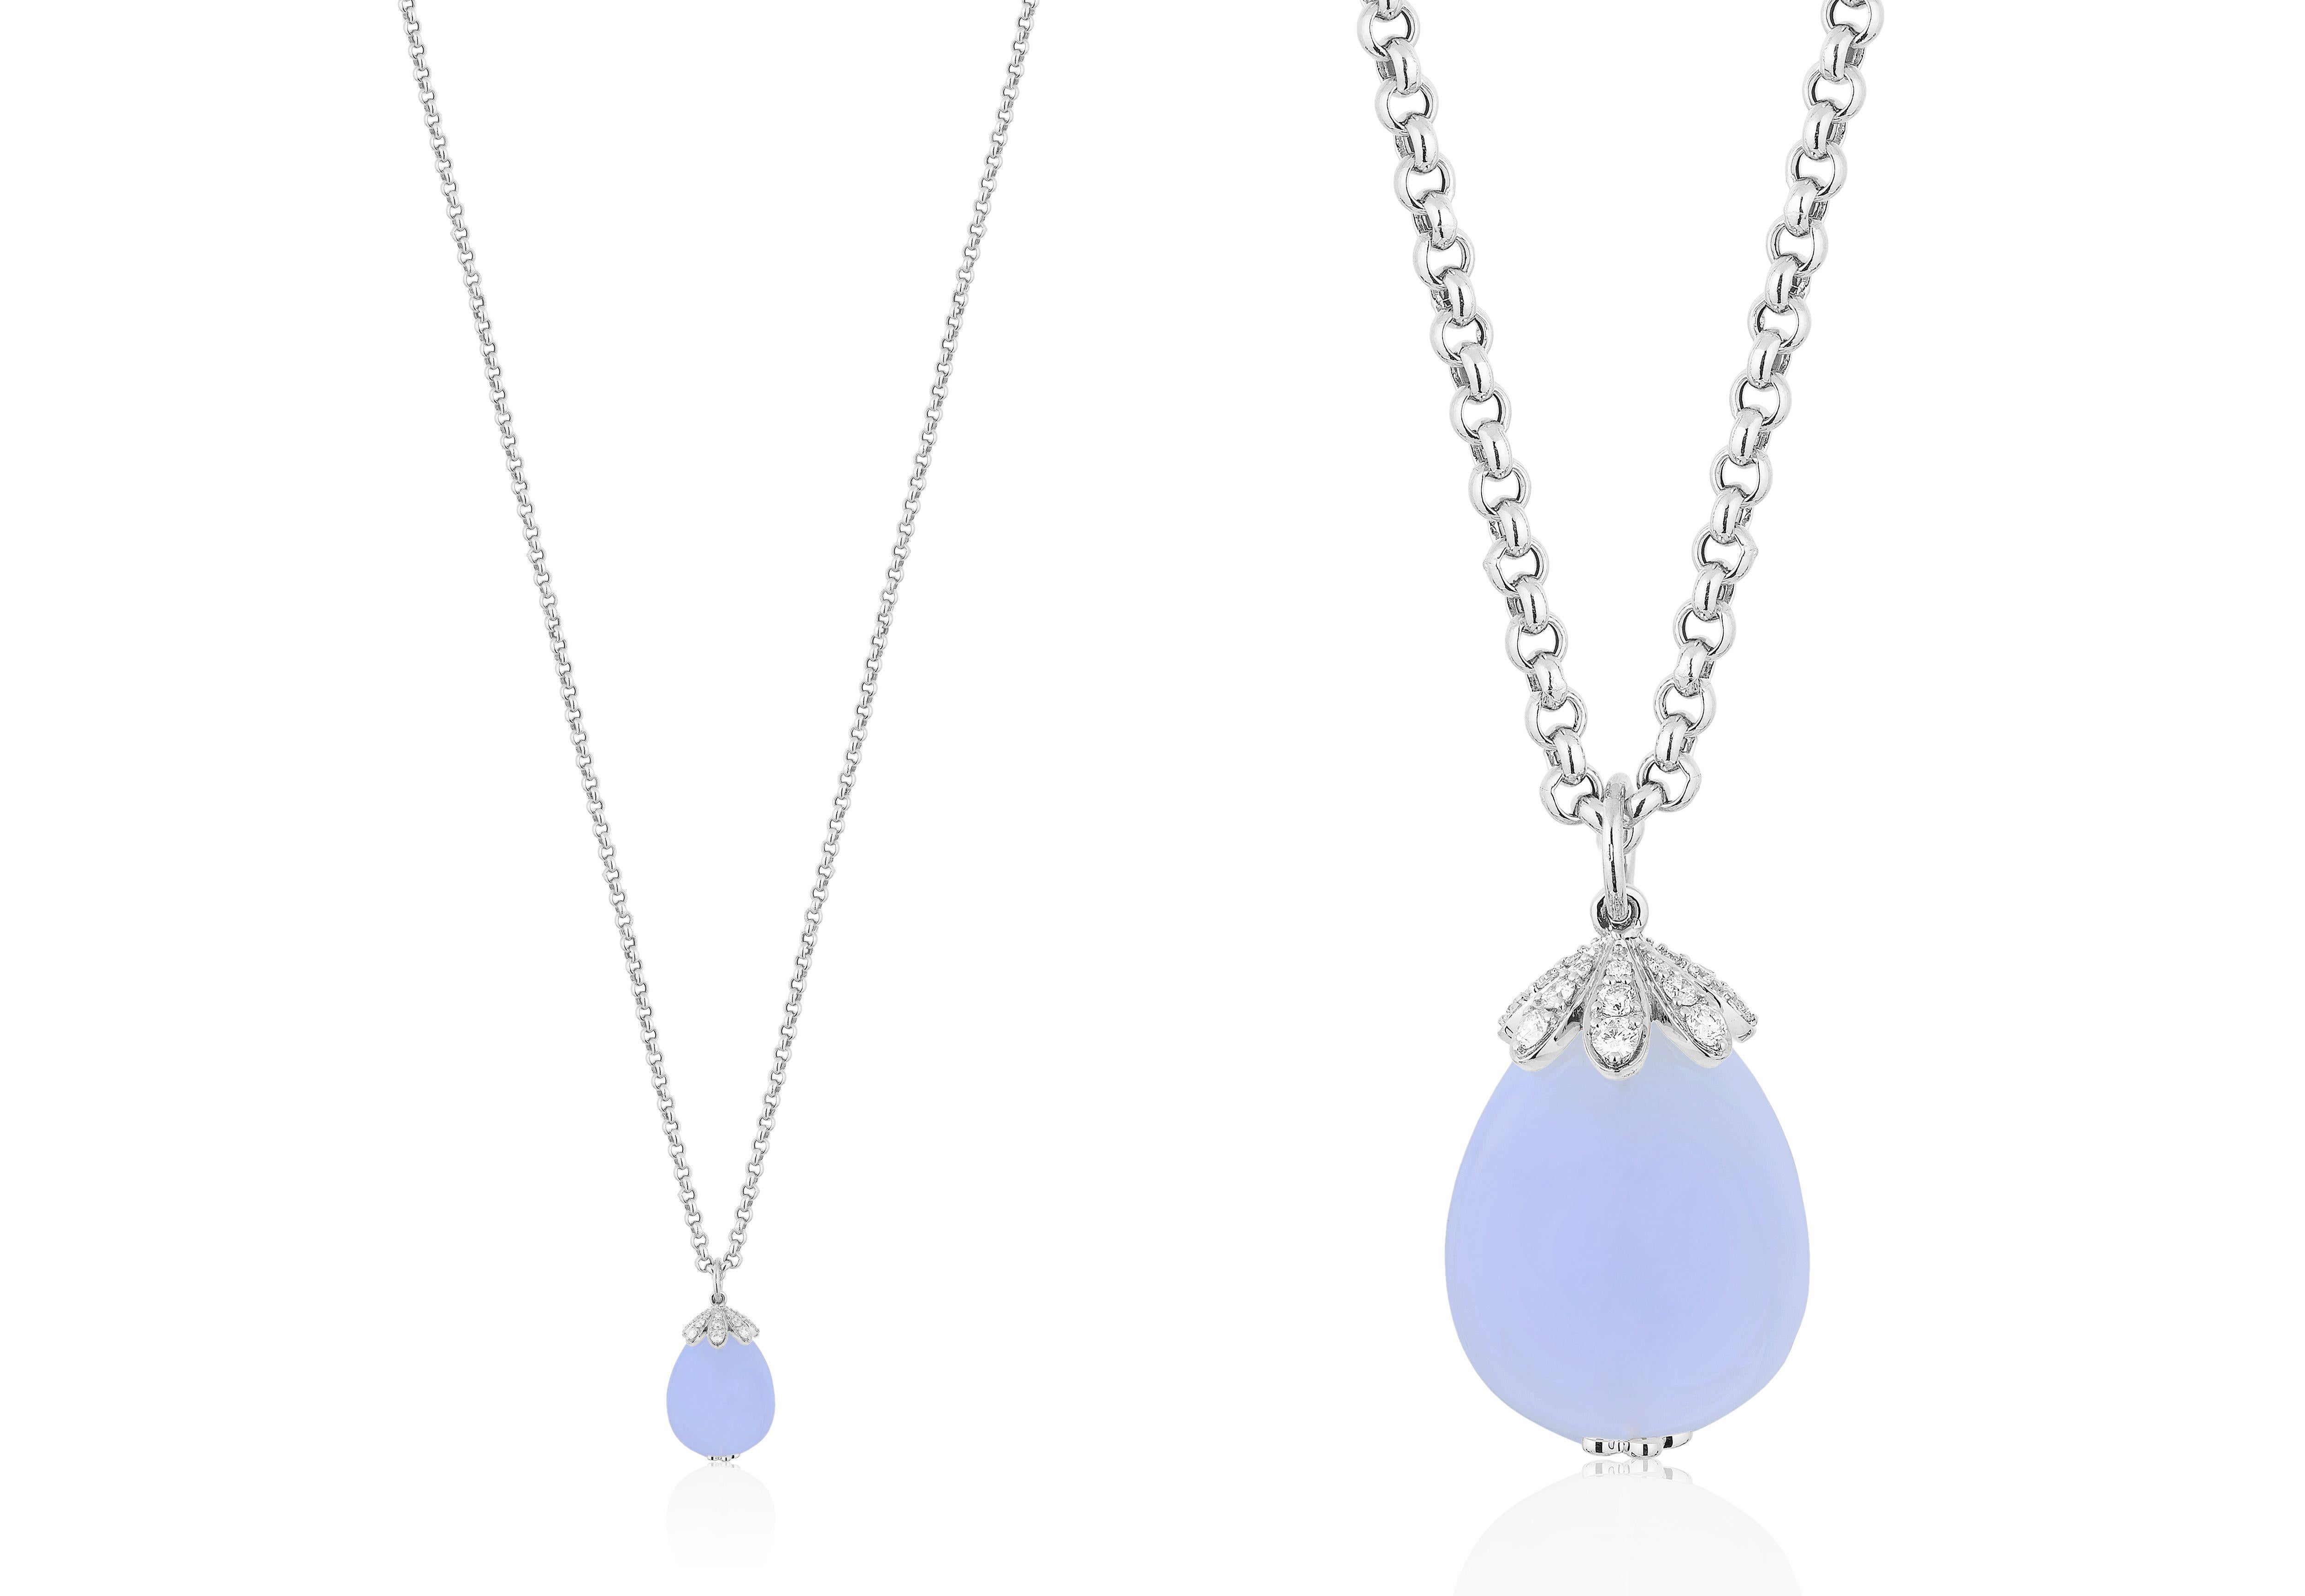 Drop Blue Chalcedony Pendant with Diamonds in 18K White Gold with Black Rhodium, from 'Naughty' Collection
Stone size: 22.75 X 18 mm
Gemstone Approx Wt: Chalcedony- 49.63cts. 
Diamonds: G-H / VS, Approx Wt: 0.56 Carats.